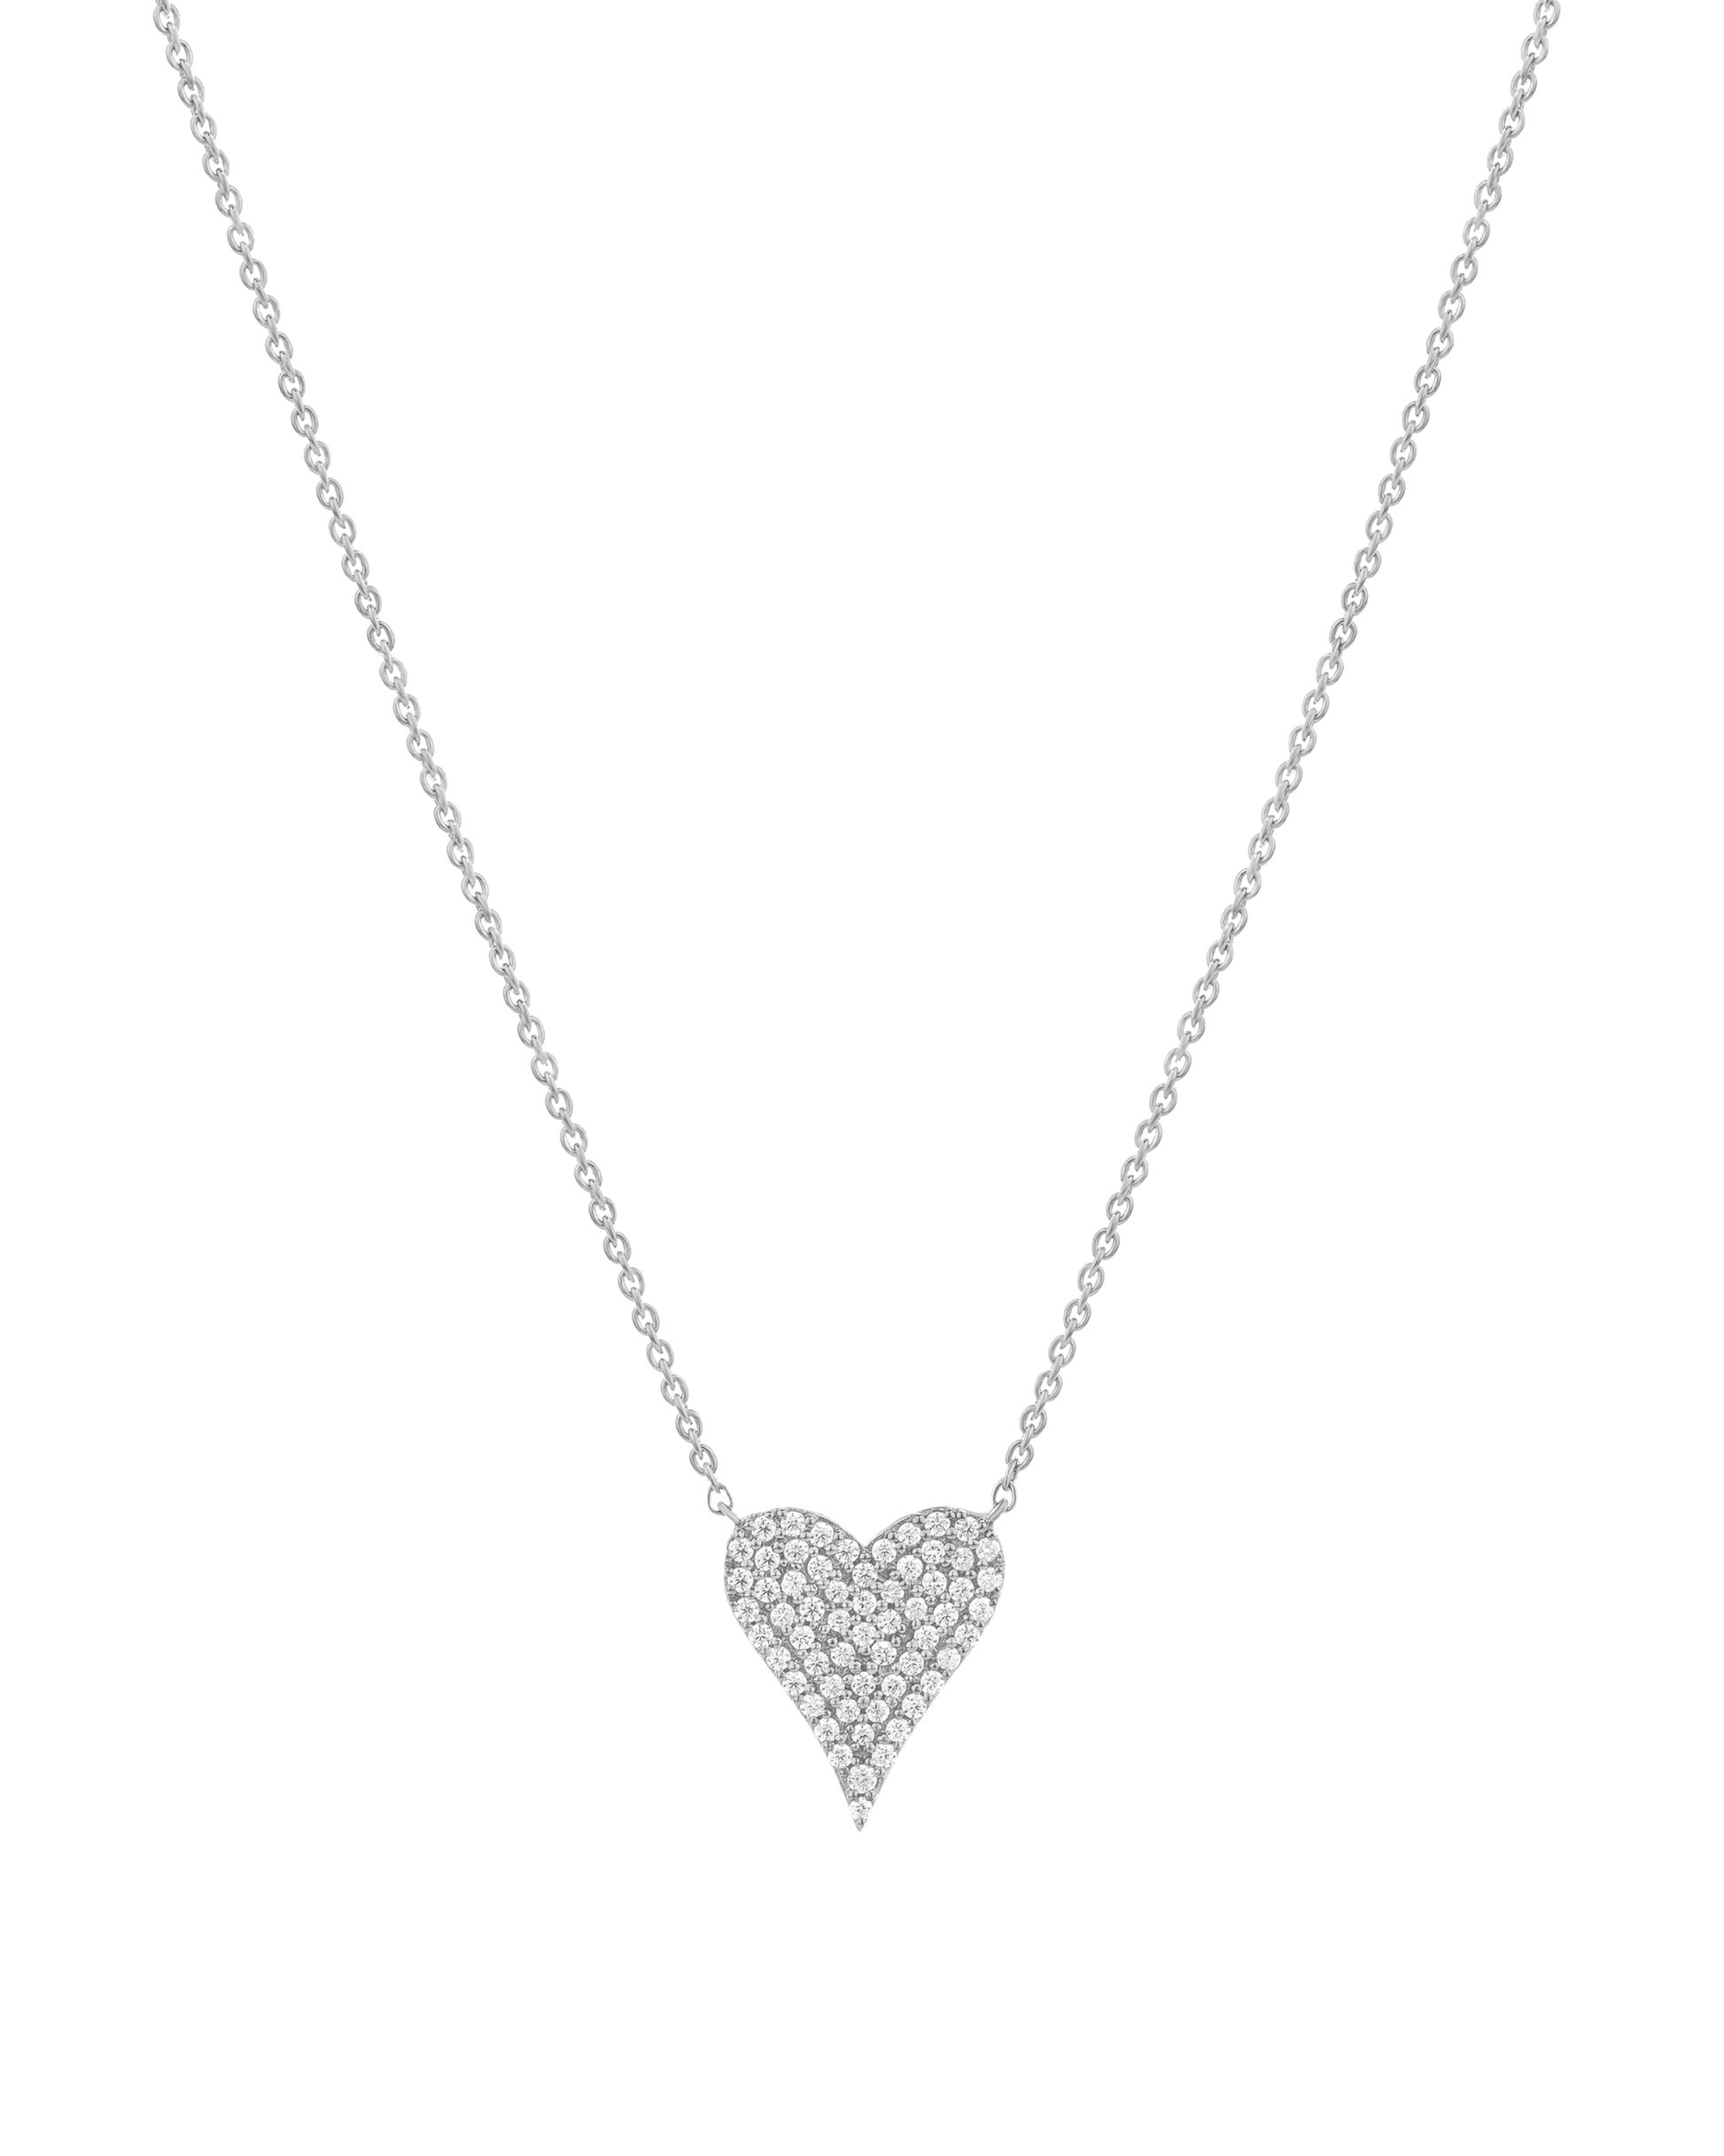 Medium Diamond Paved Heart Necklace - 14K White Gold Necklaces magal-dev 